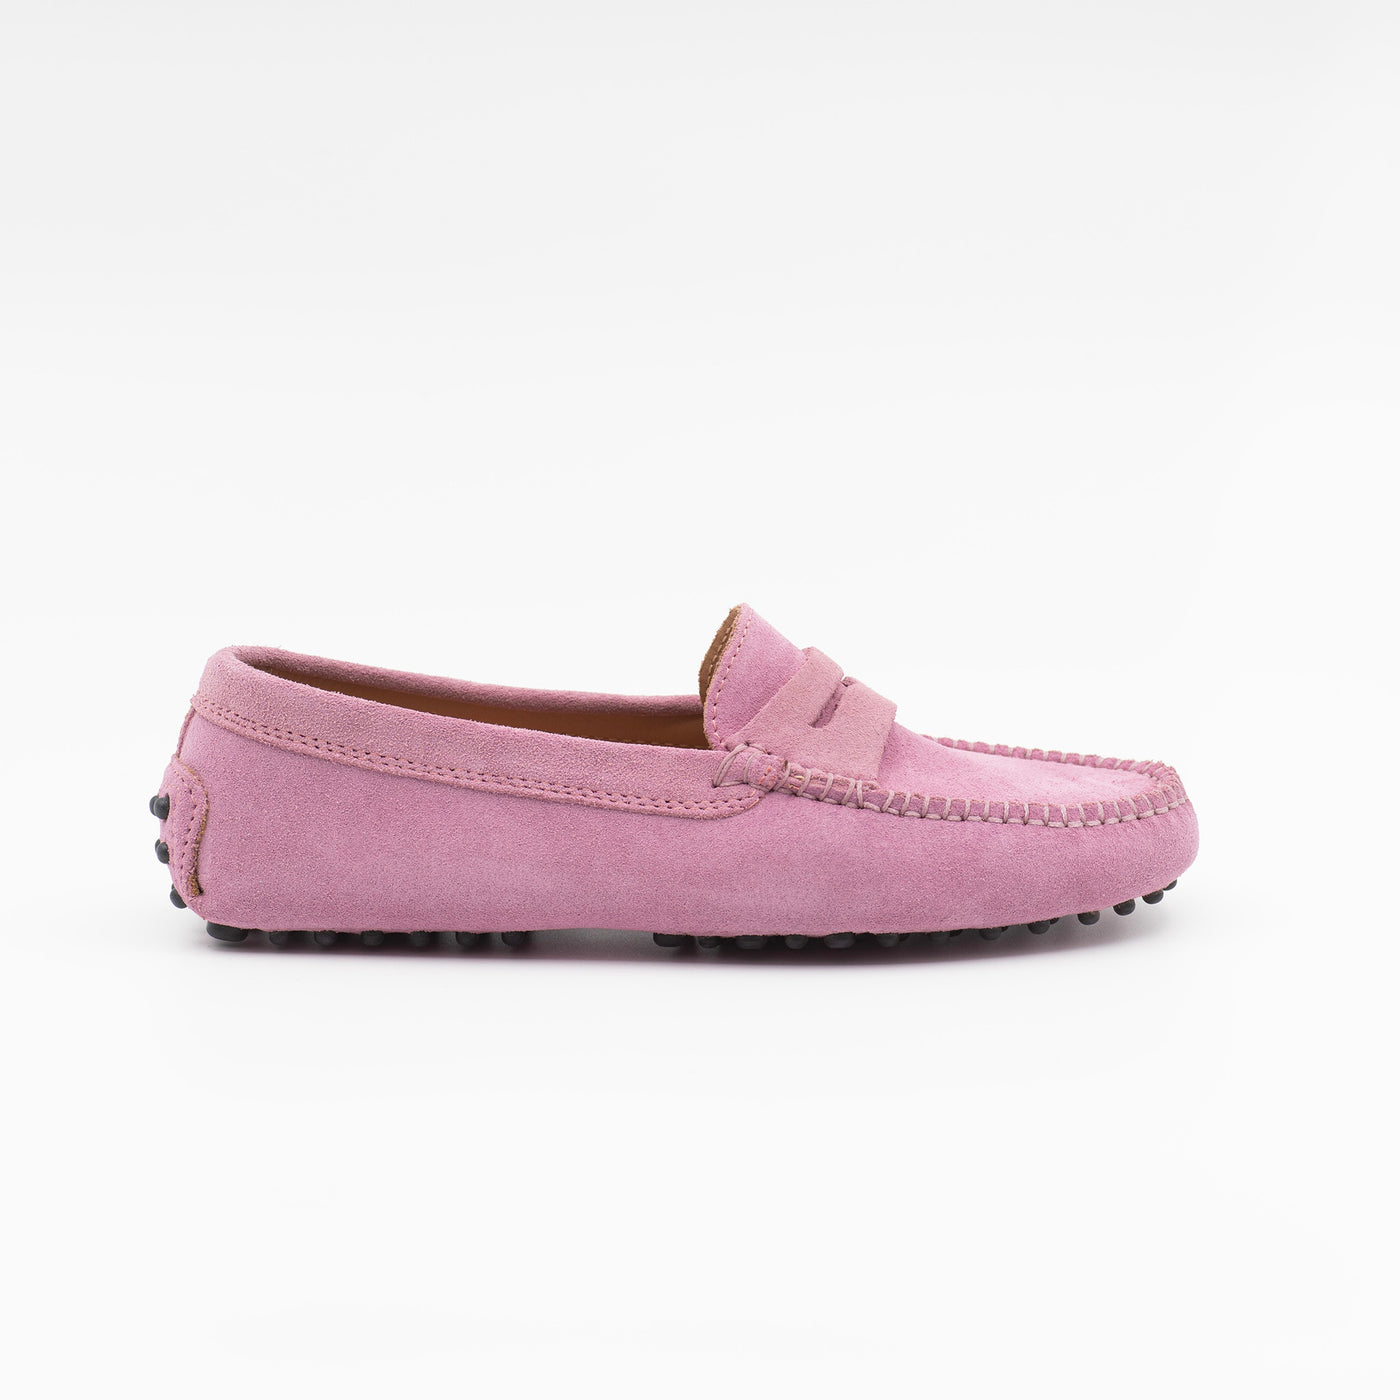 Gommino loafer in pink suede